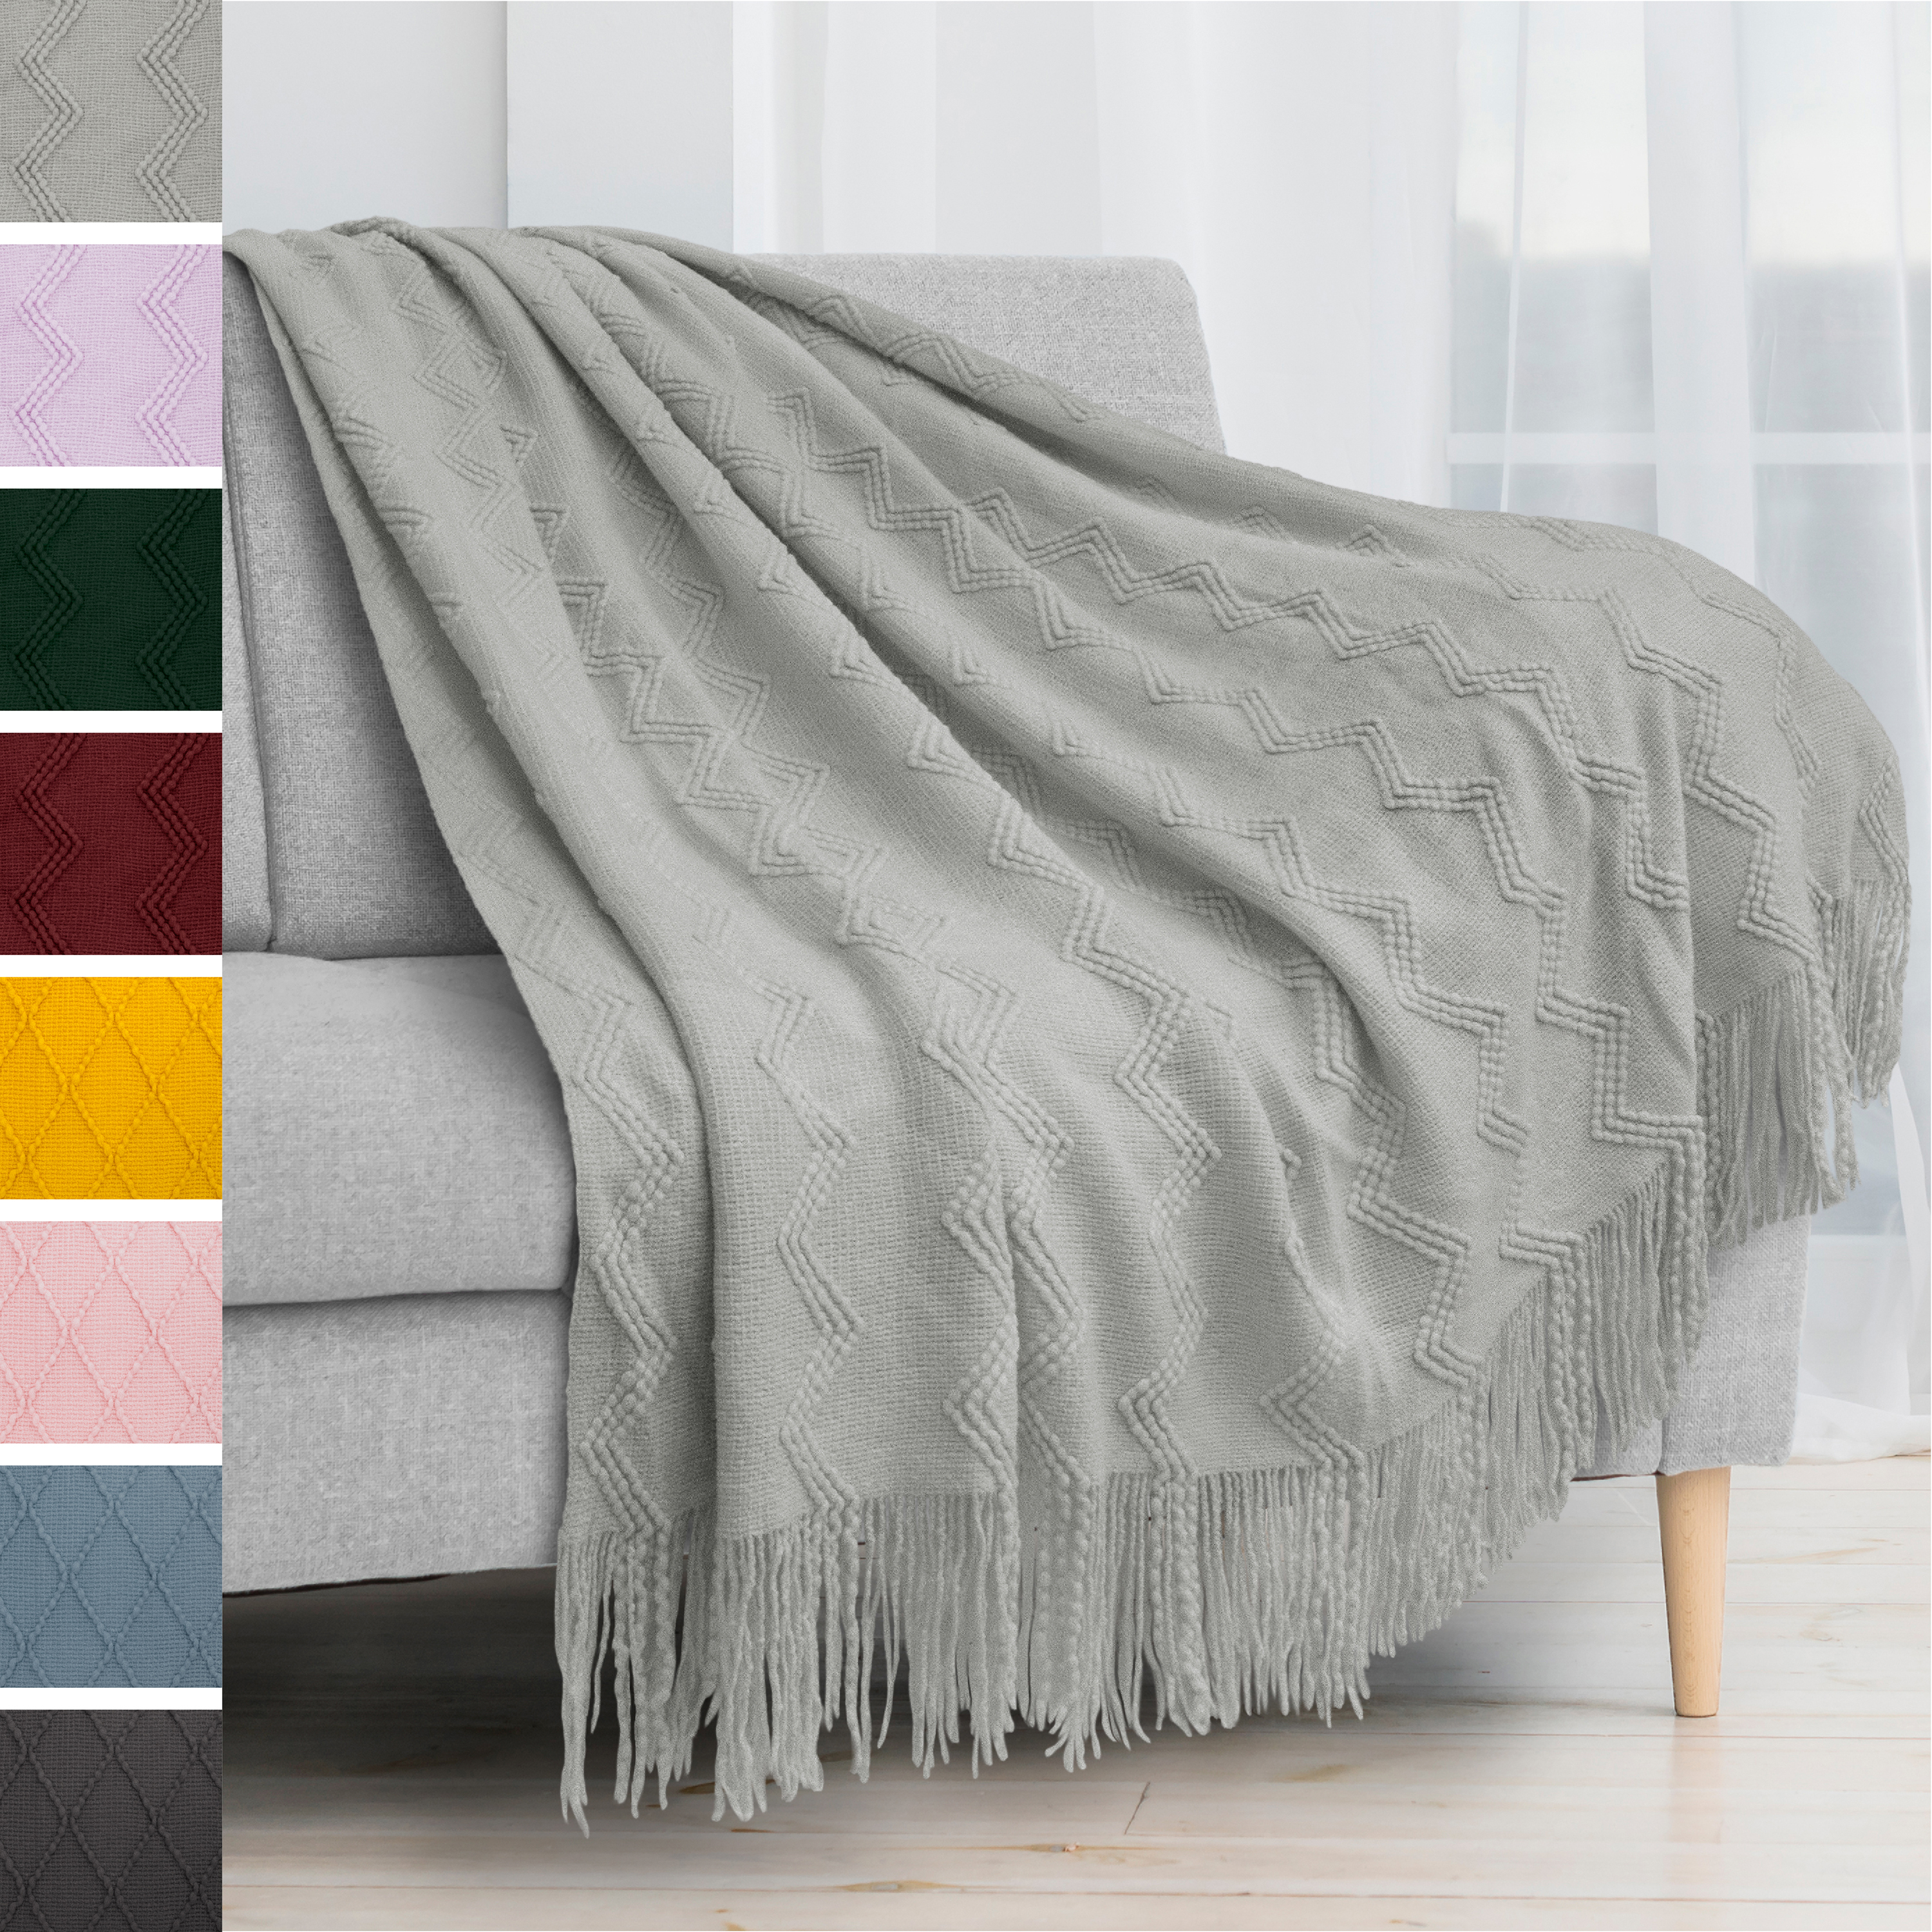 Textured Knitted Fringe Throw Blanket Decorative For Couch Sofa Bed Lightweight EBay